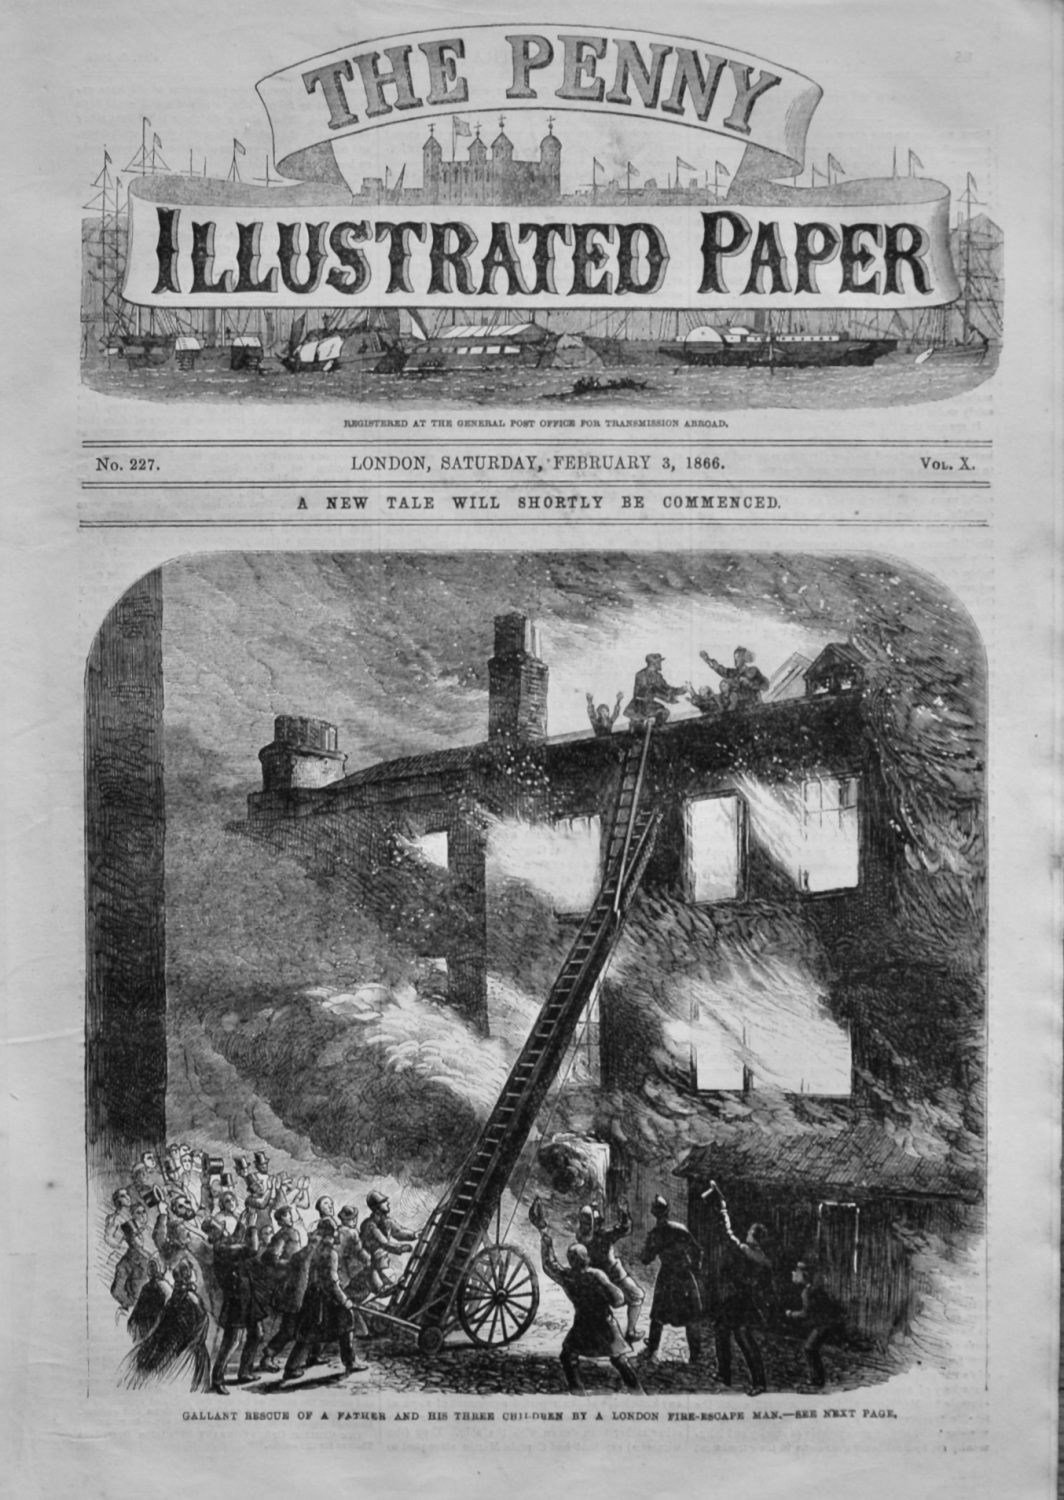 The Penny Illustrated Paper,  February 3rd, 1866.